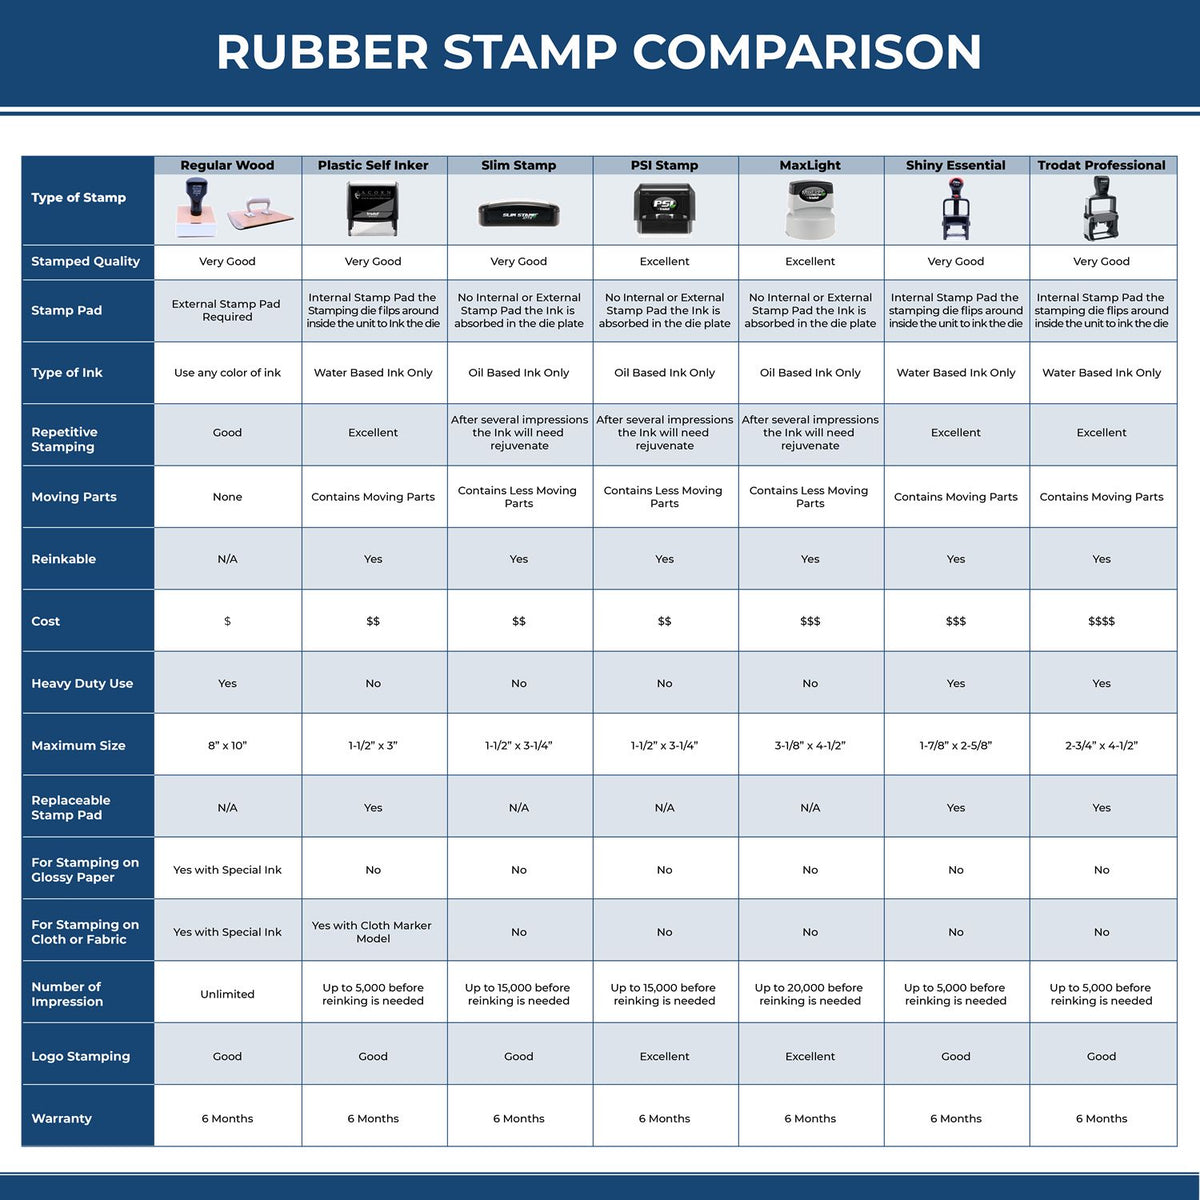 A comparison chart for the different types of mount models available for the Louisiana Landscape Architectural Seal Stamp.